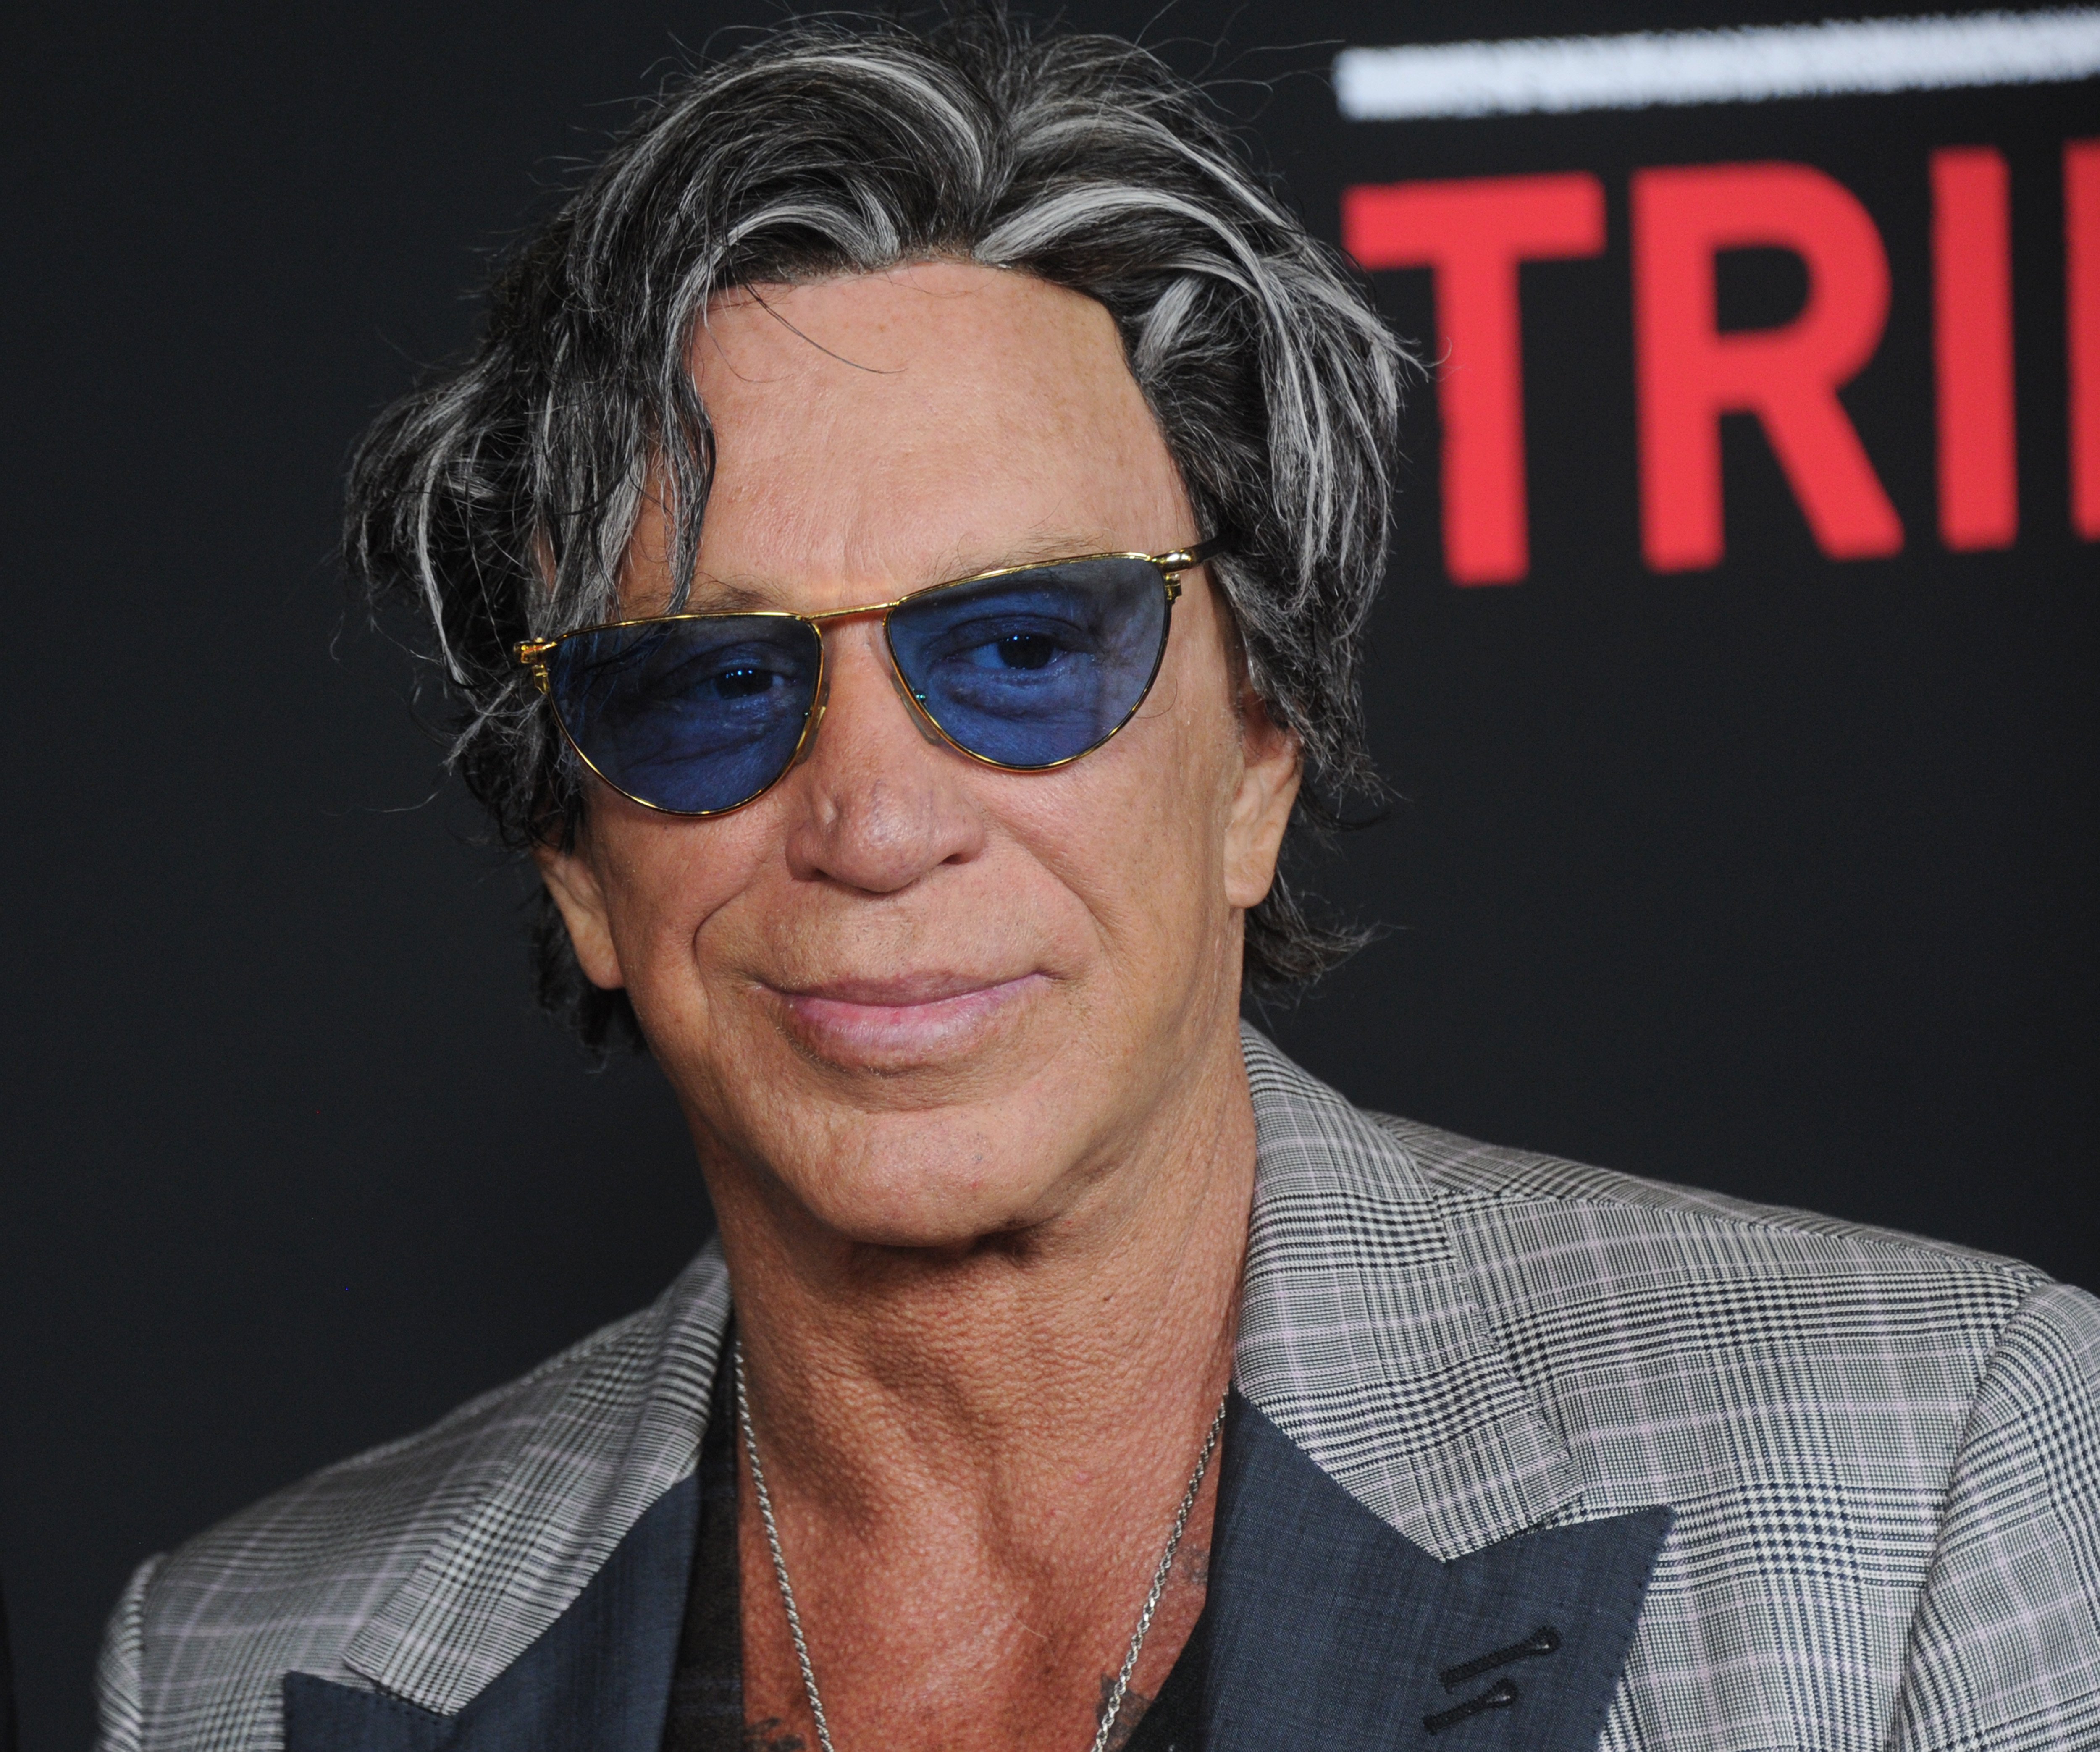 Actor Mickey Rourke arrives at the premiere of Open Road's "Triple 9" at Regal Cinemas L.A. Live on February 16, 2016 in Los Angeles, California. | Source: Getty Images